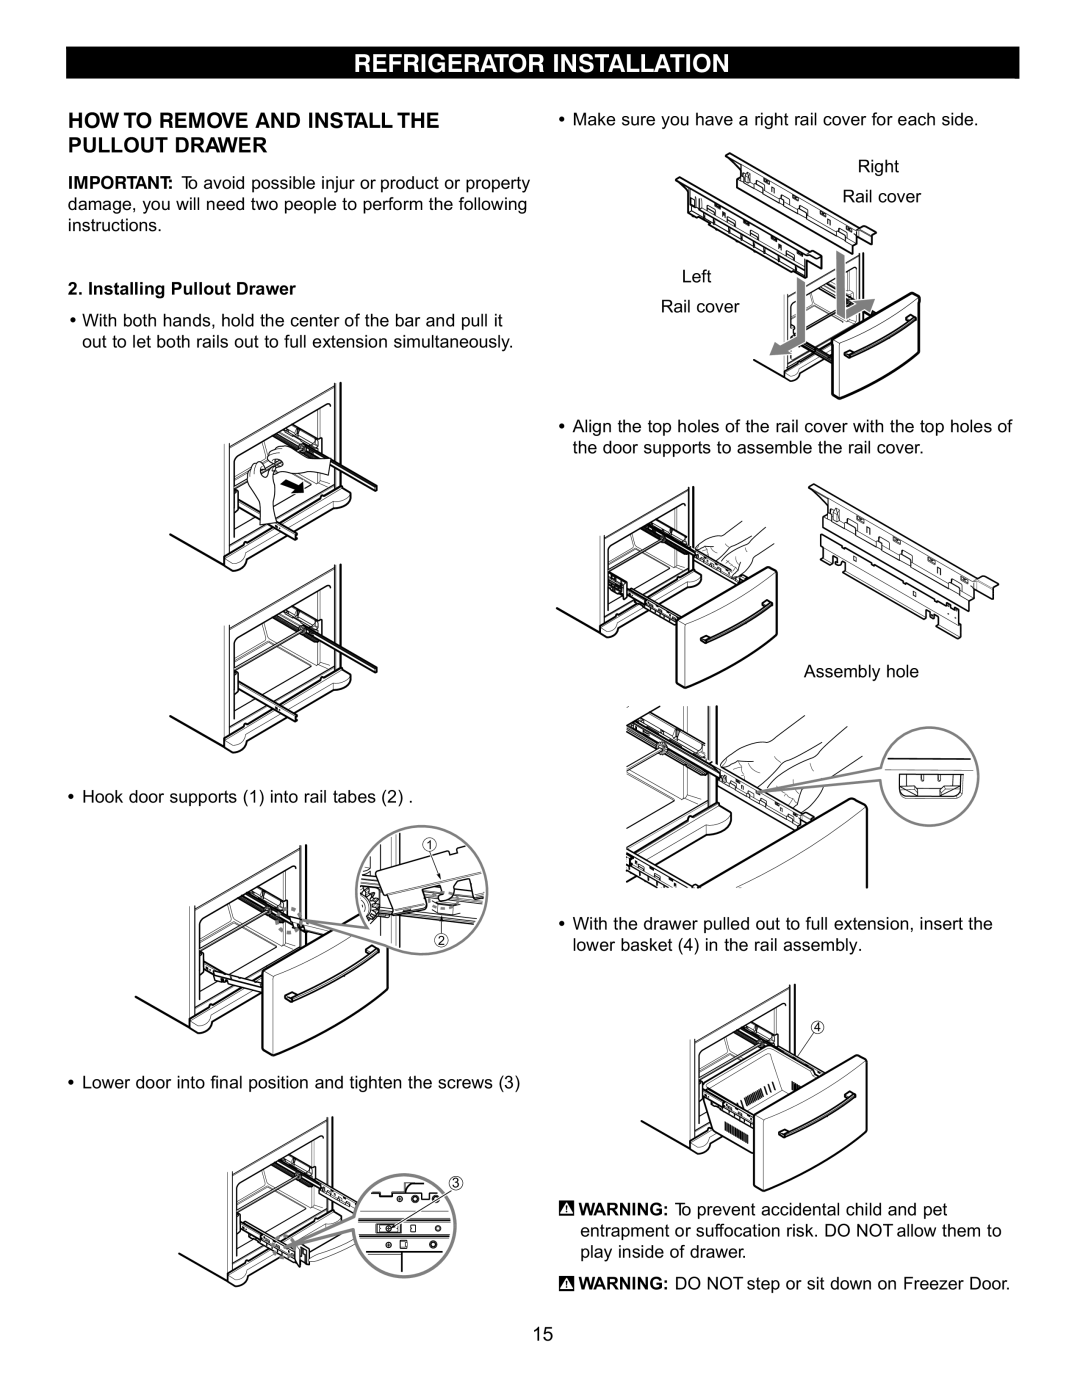 LG Electronics LFC20740 How To Remove And Install The Pullout Drawer, Installing Pullout Drawer, Refrigerator Installation 